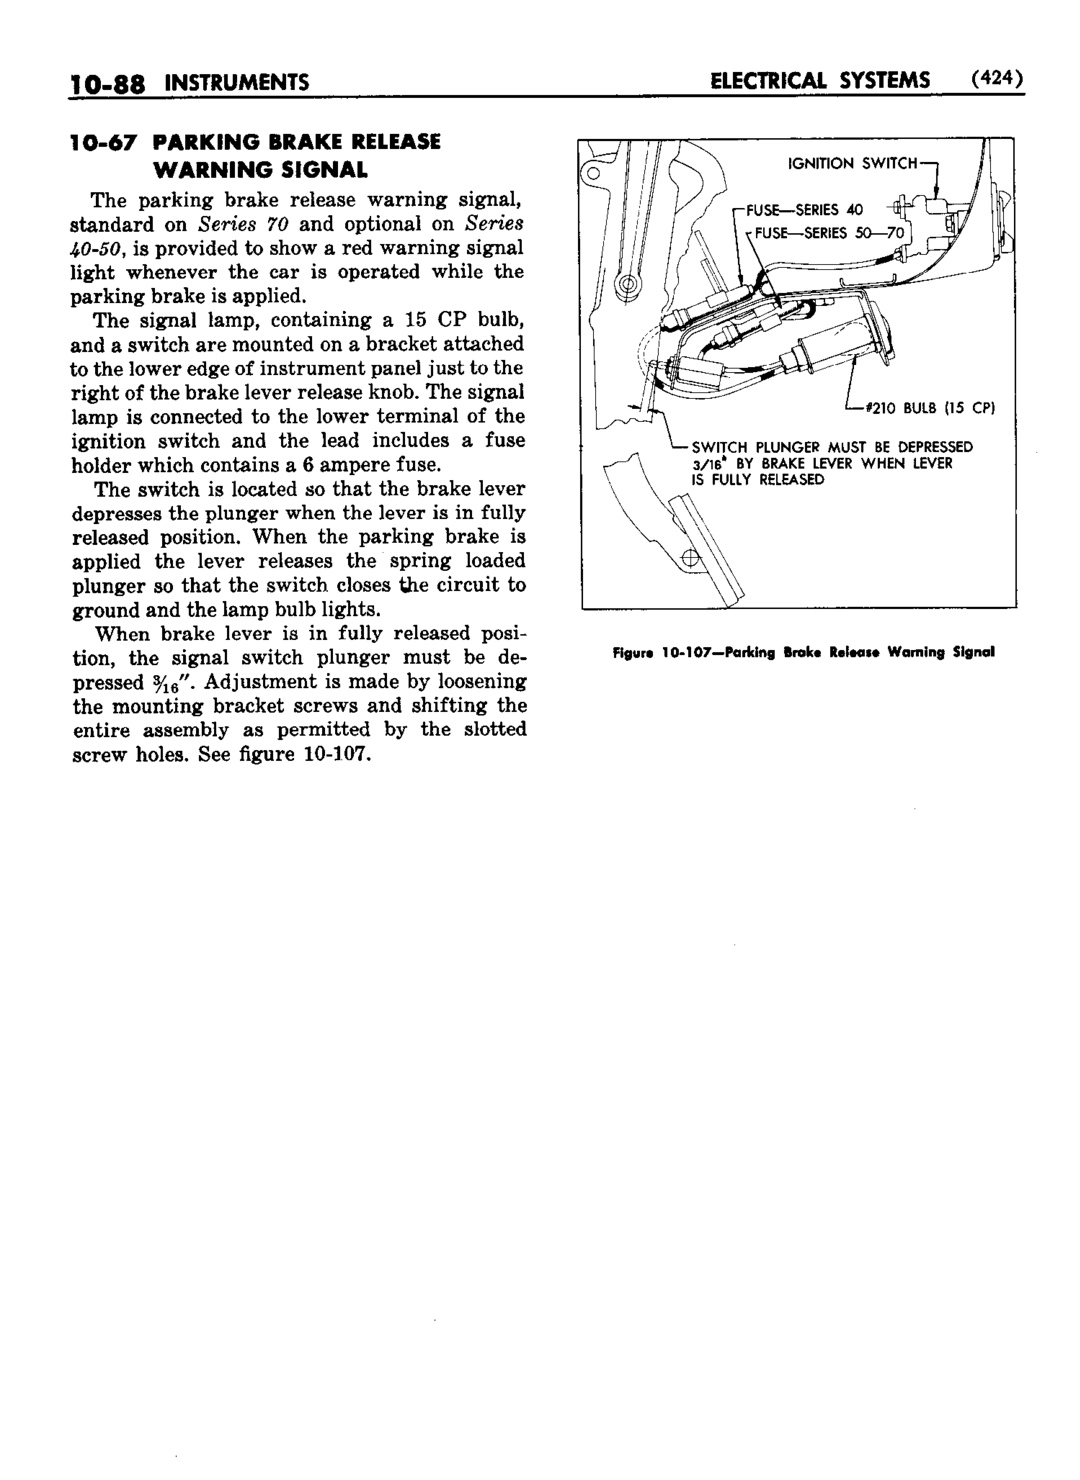 n_11 1952 Buick Shop Manual - Electrical Systems-088-088.jpg